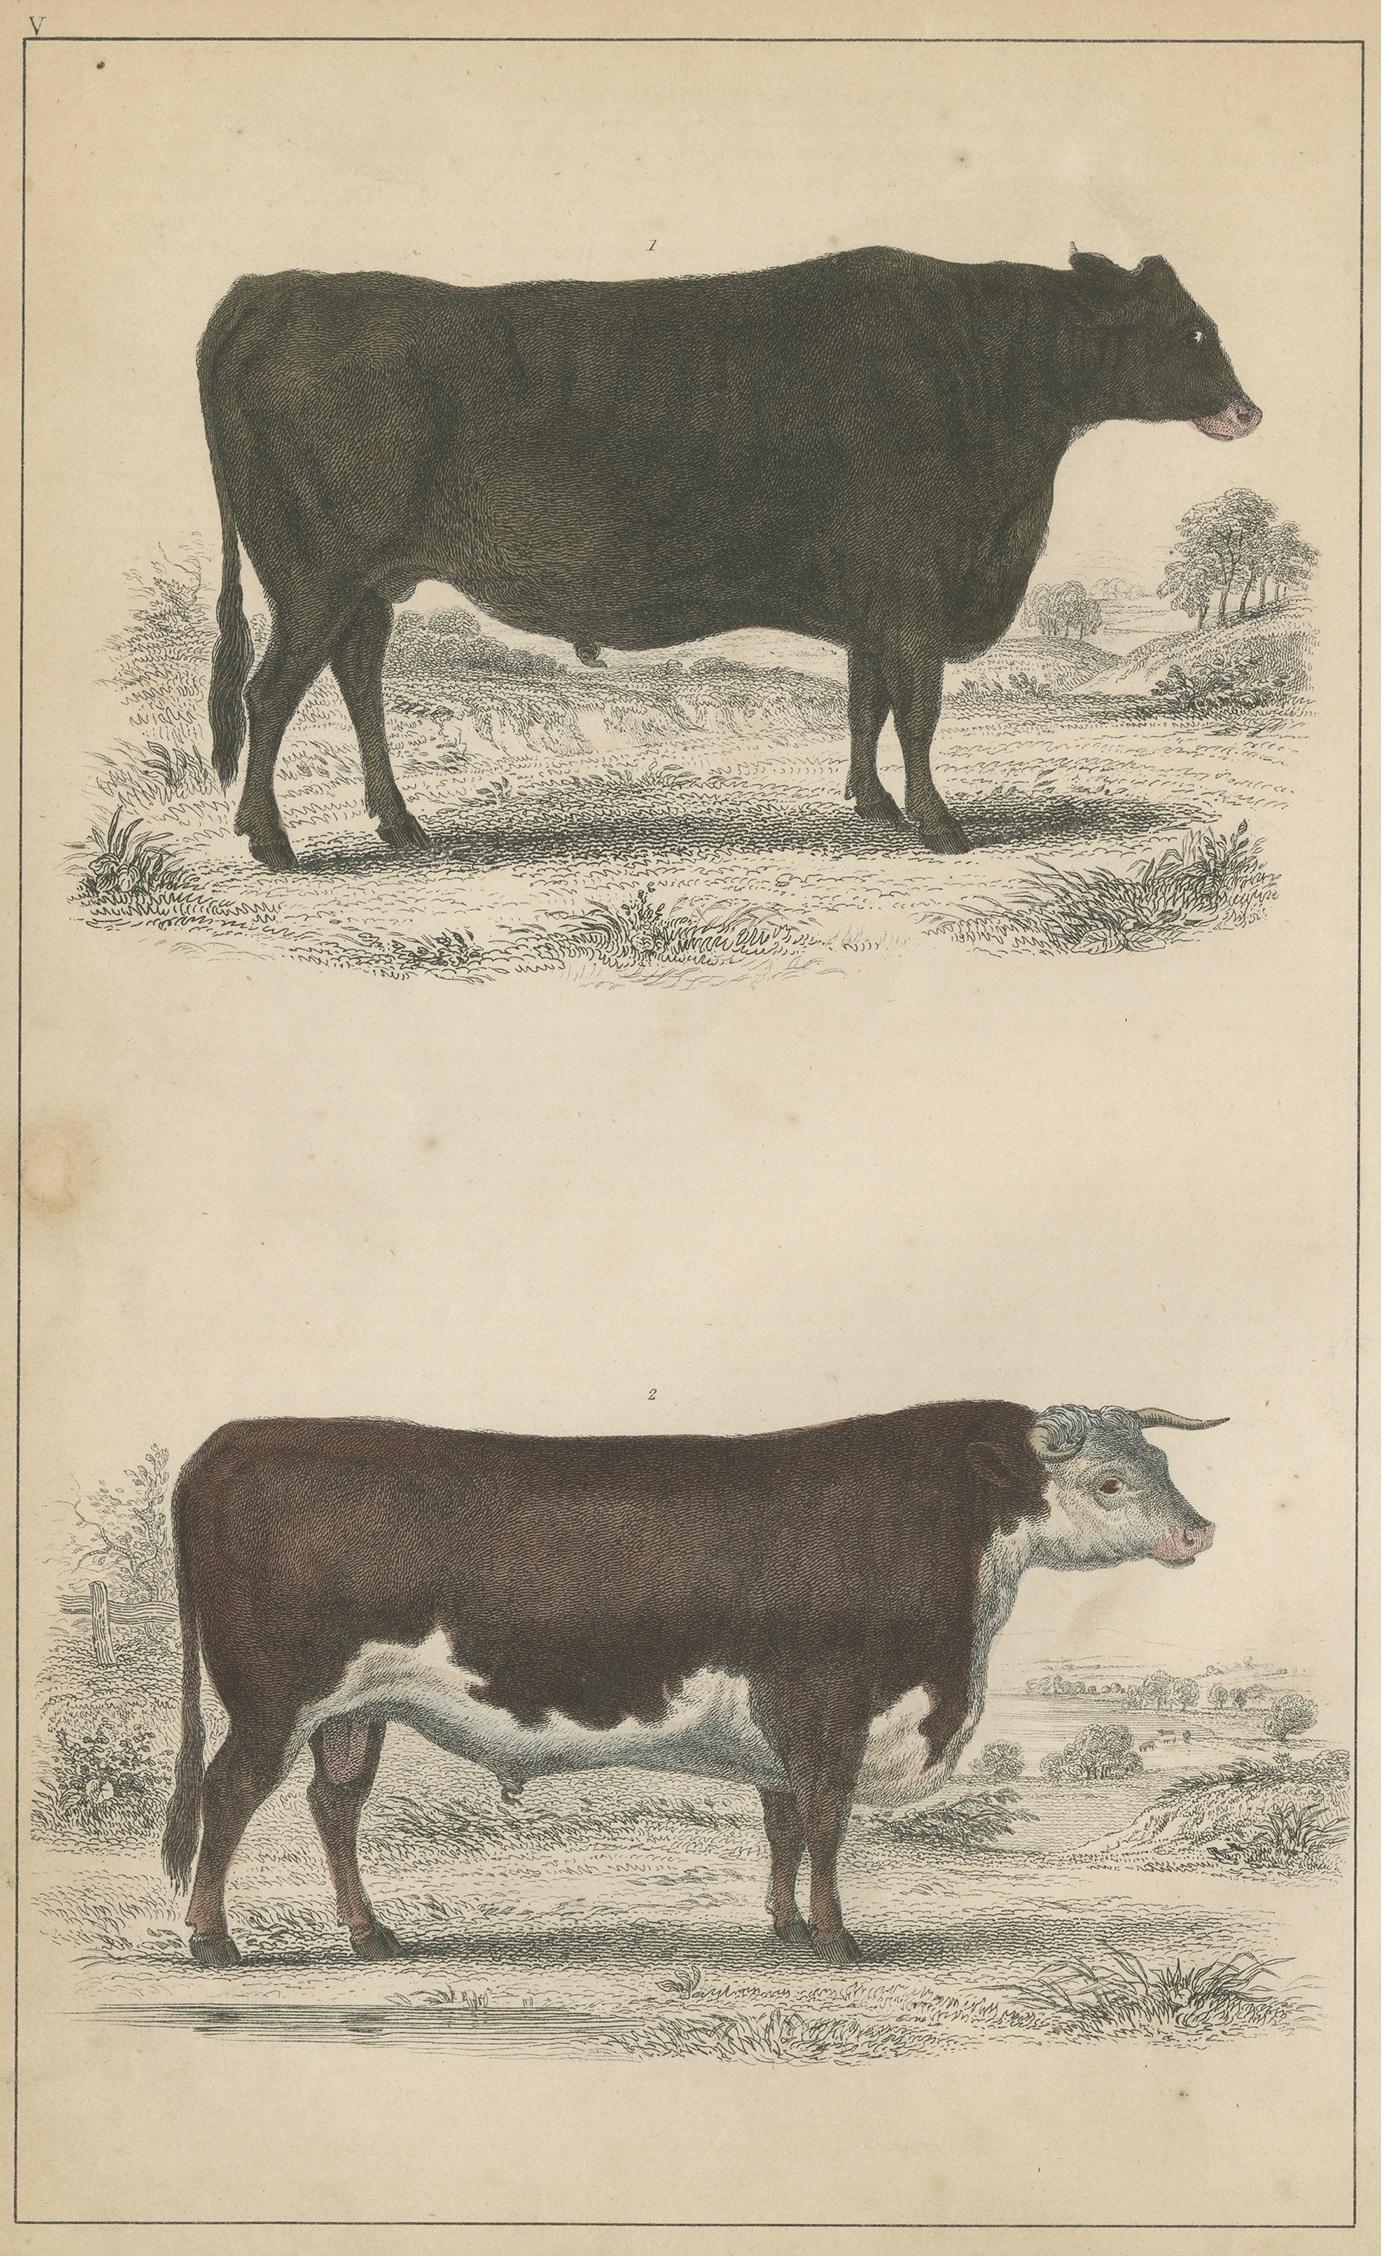 Antique print of a Suffolk Ox and Herefordshire Bull. This print originates from 'A History of the Earth and Animated Nature' by Oliver Goldsmith. Published by A. Fullarton & Co, circa 1850.